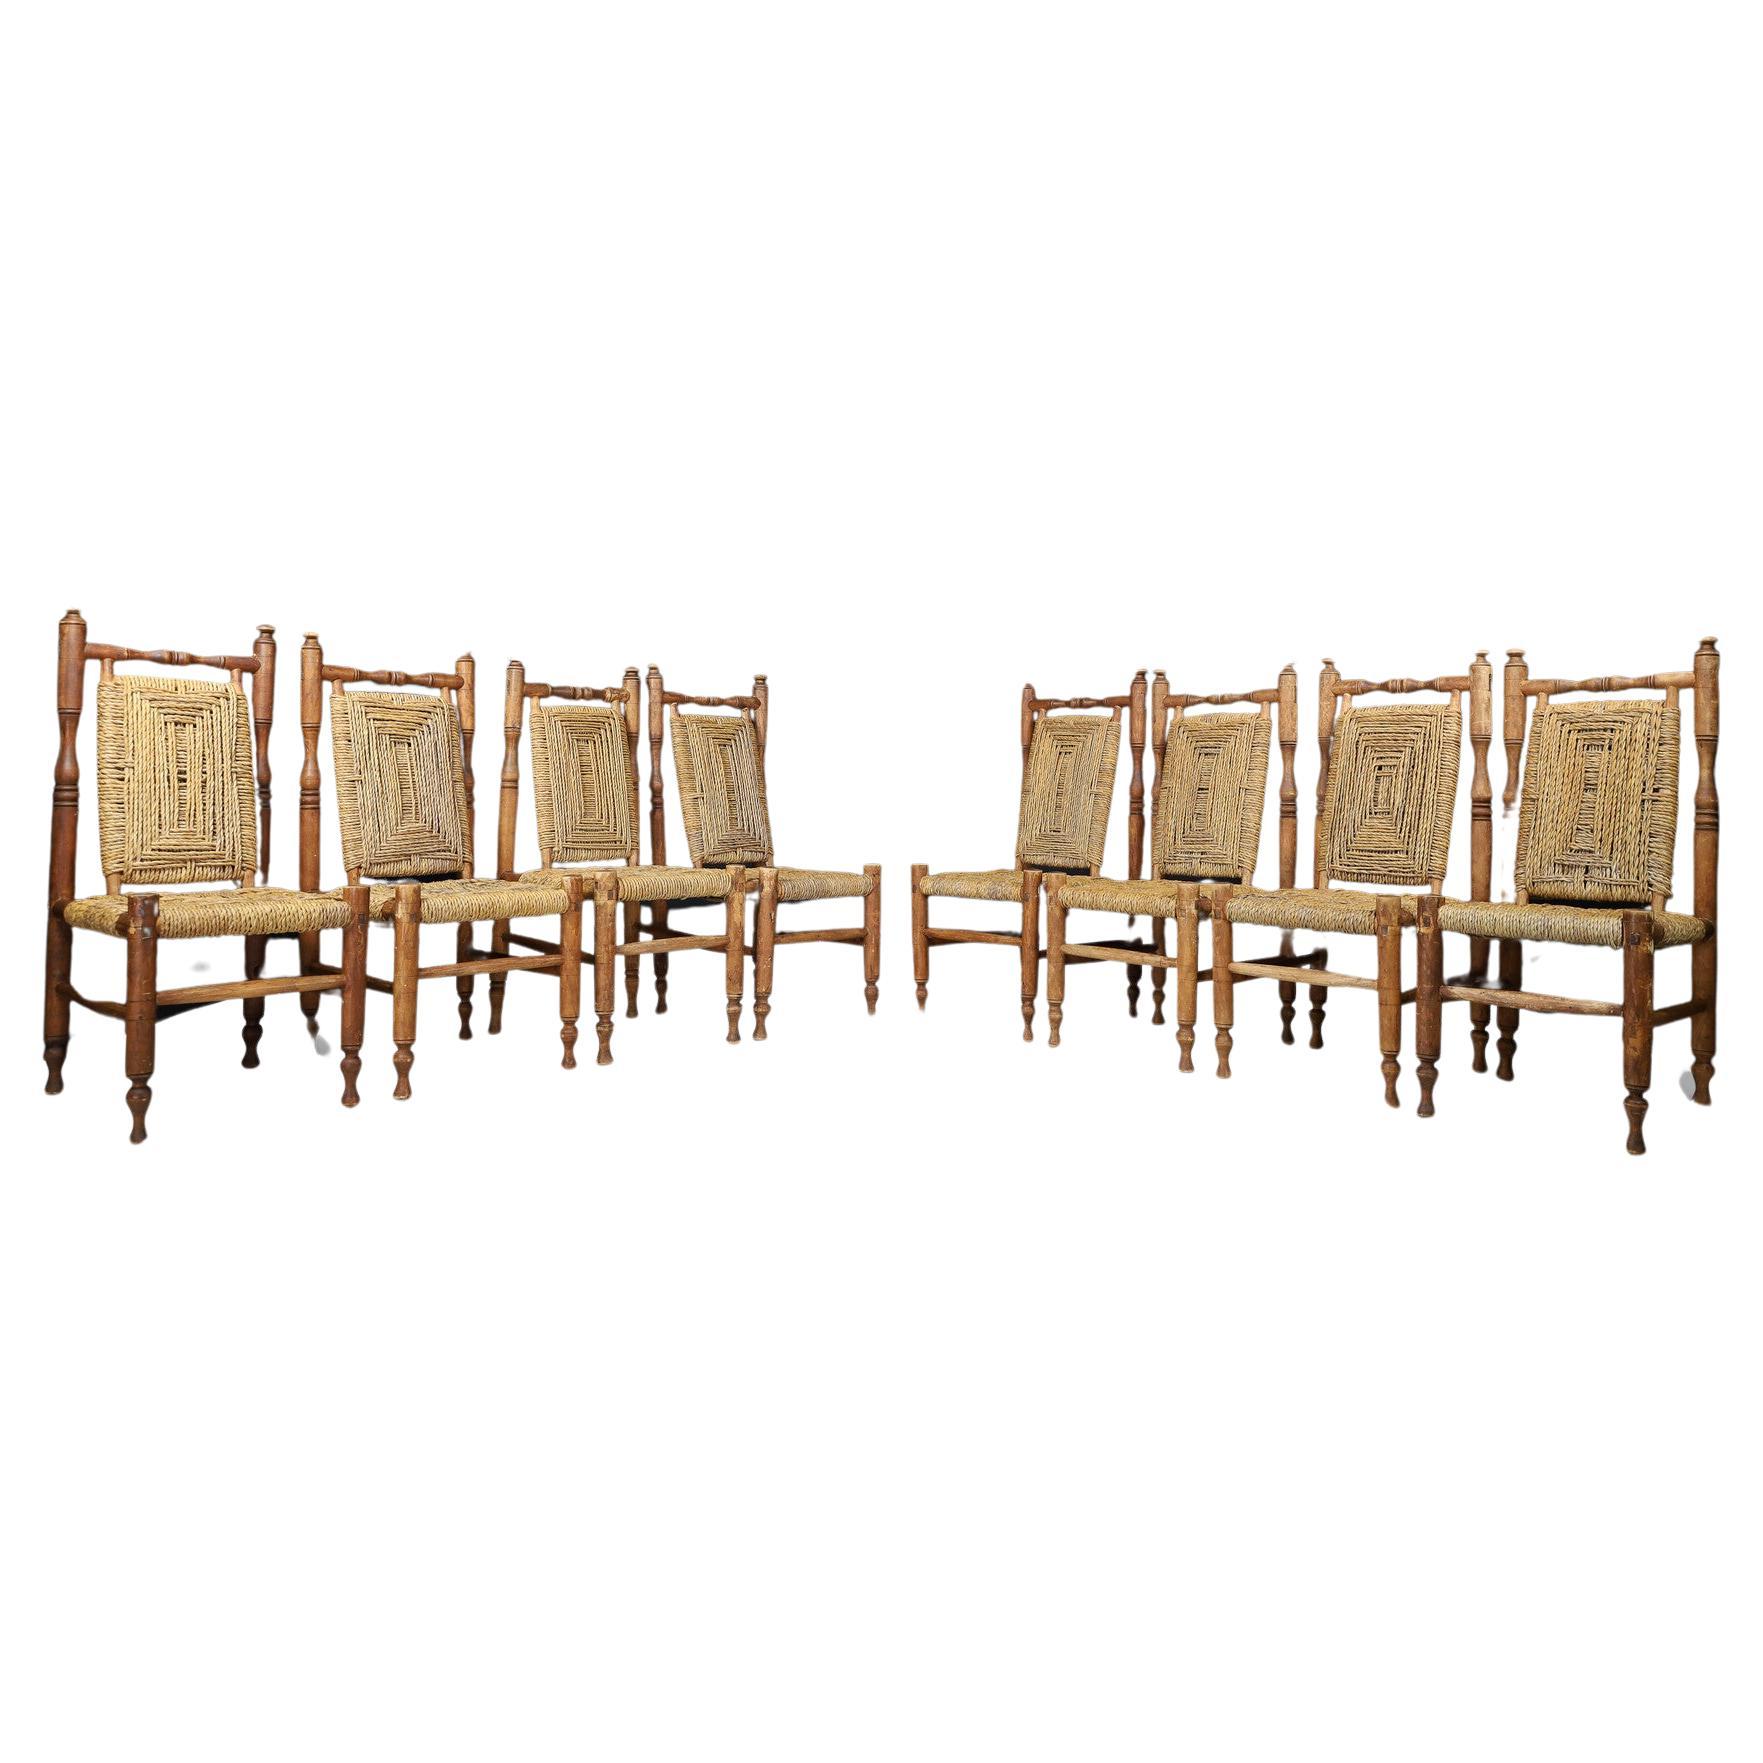 Adrien Audoux and Frida Minet, Set of 8 Mid Century Dining Chairs, circa 1950s For Sale